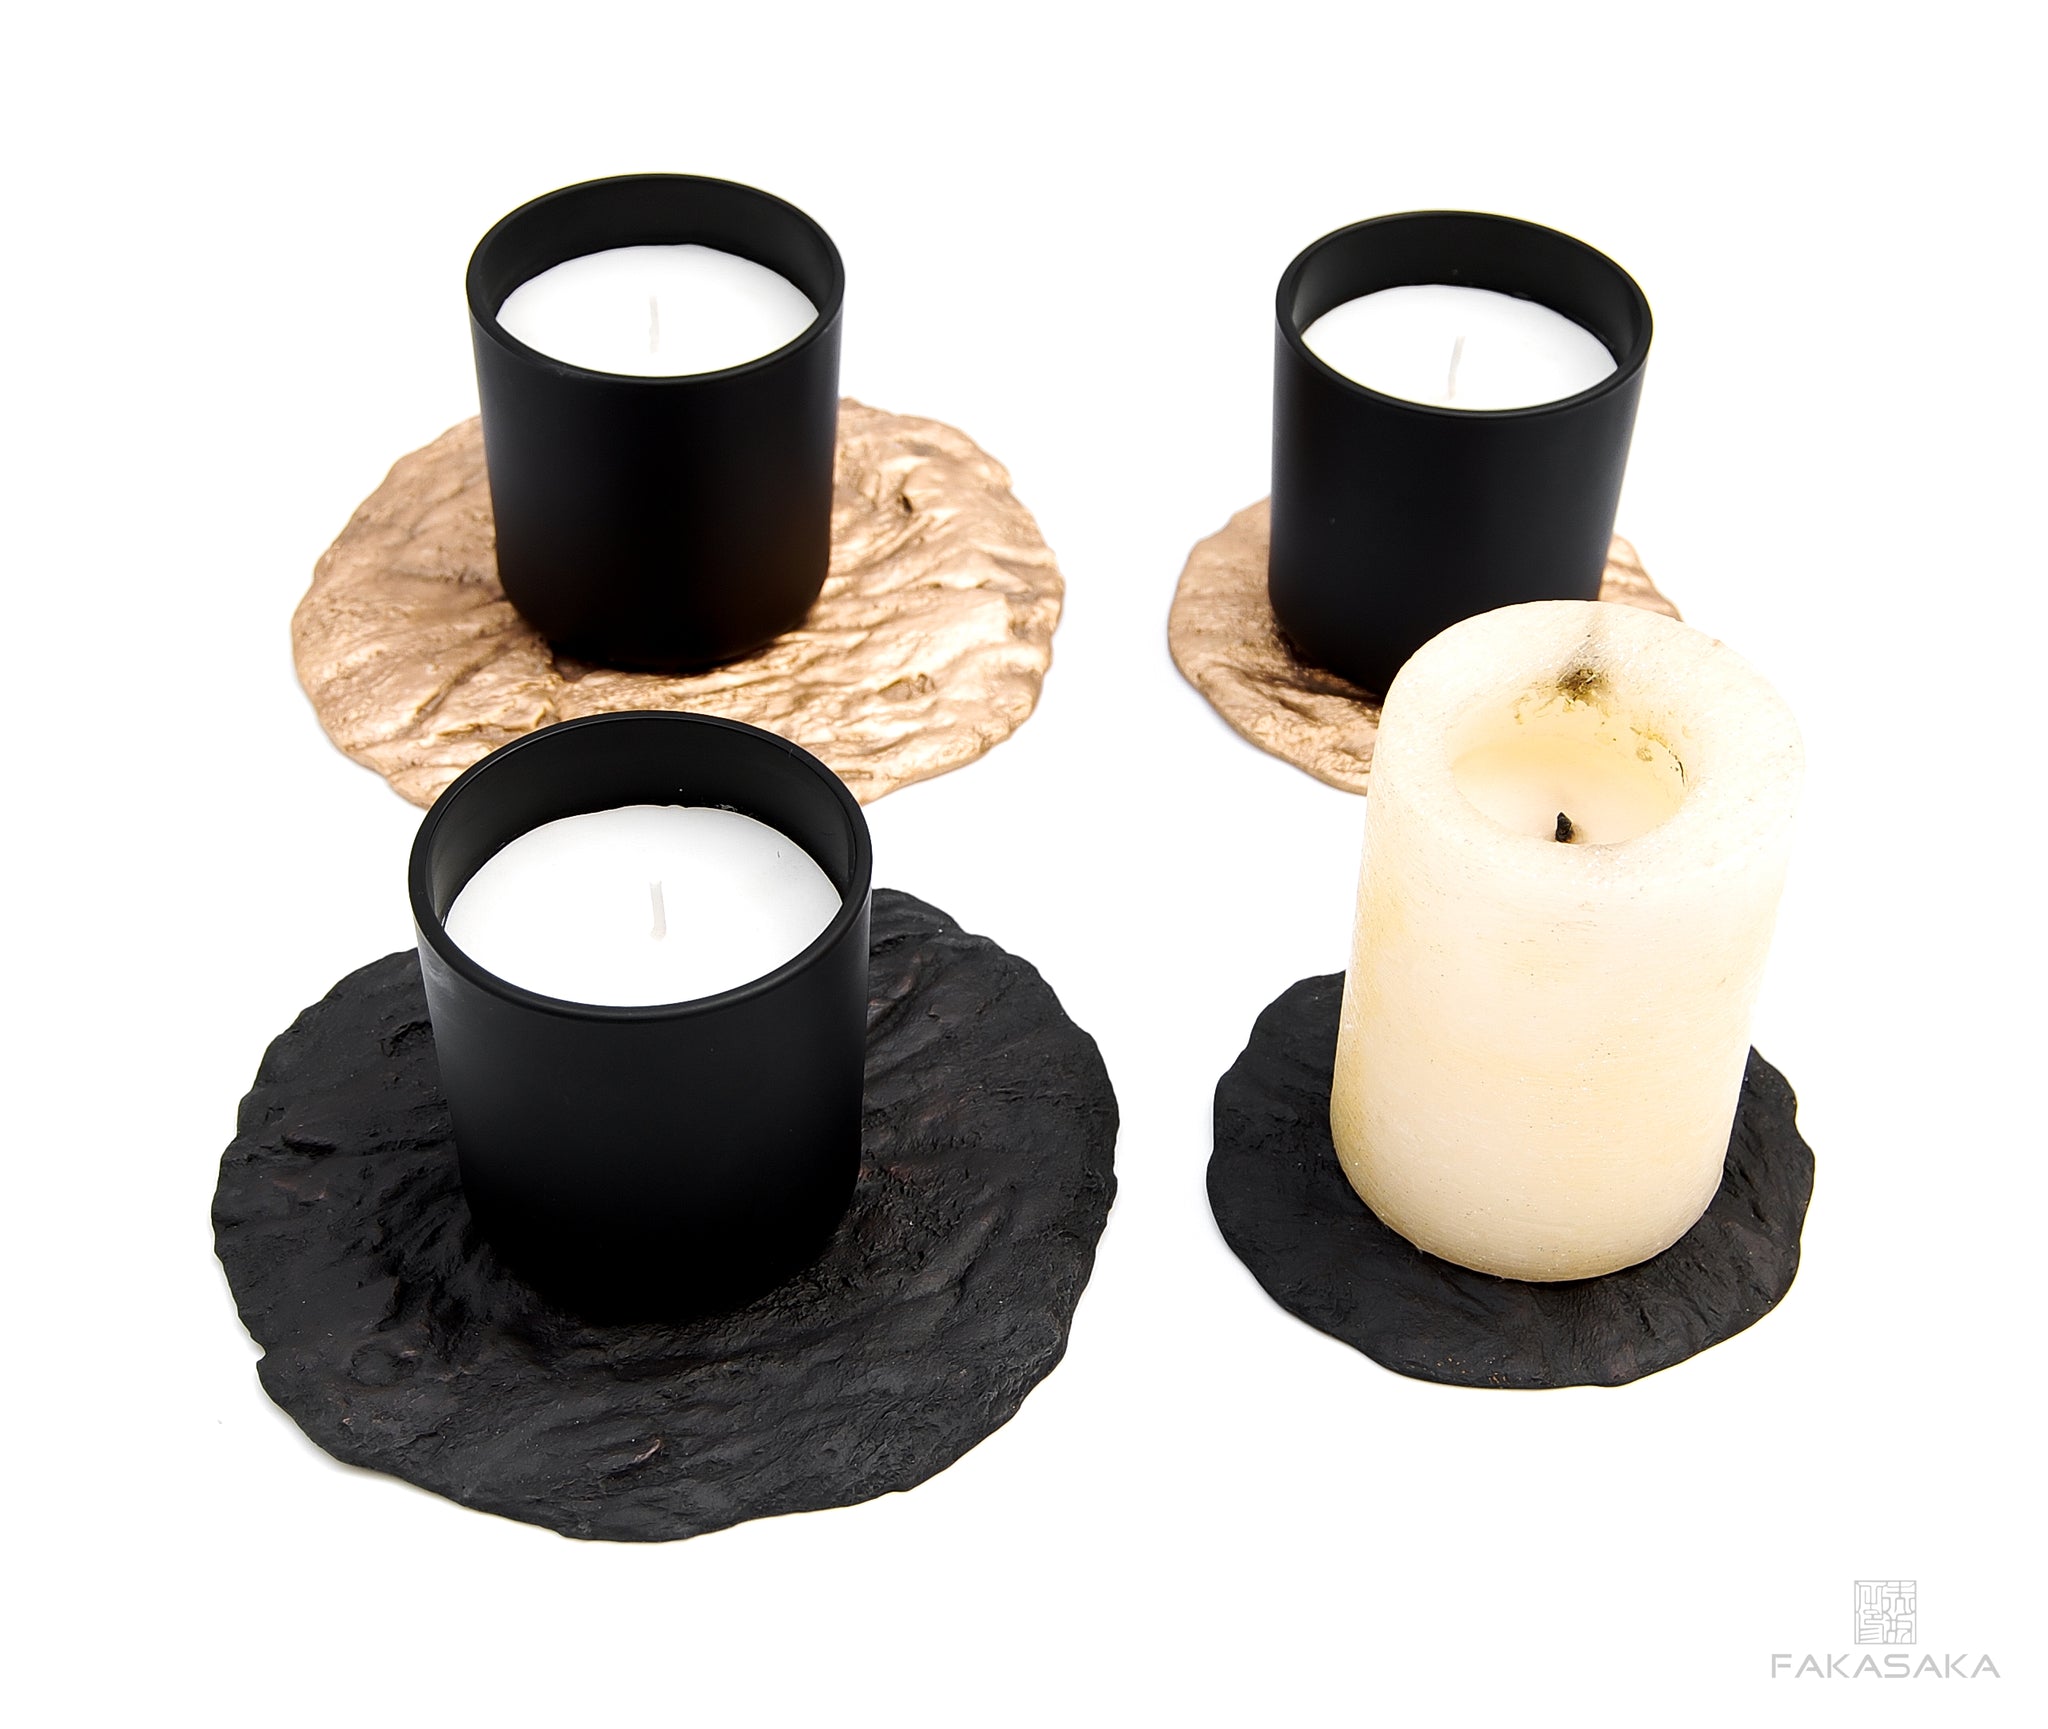 BRUTALIST COASTER 1<br><br>CUP COASTER  / BOTTLE COASTER  / CANDLE TRAY / SMALL TRAY<br><br>DARK BRONZE